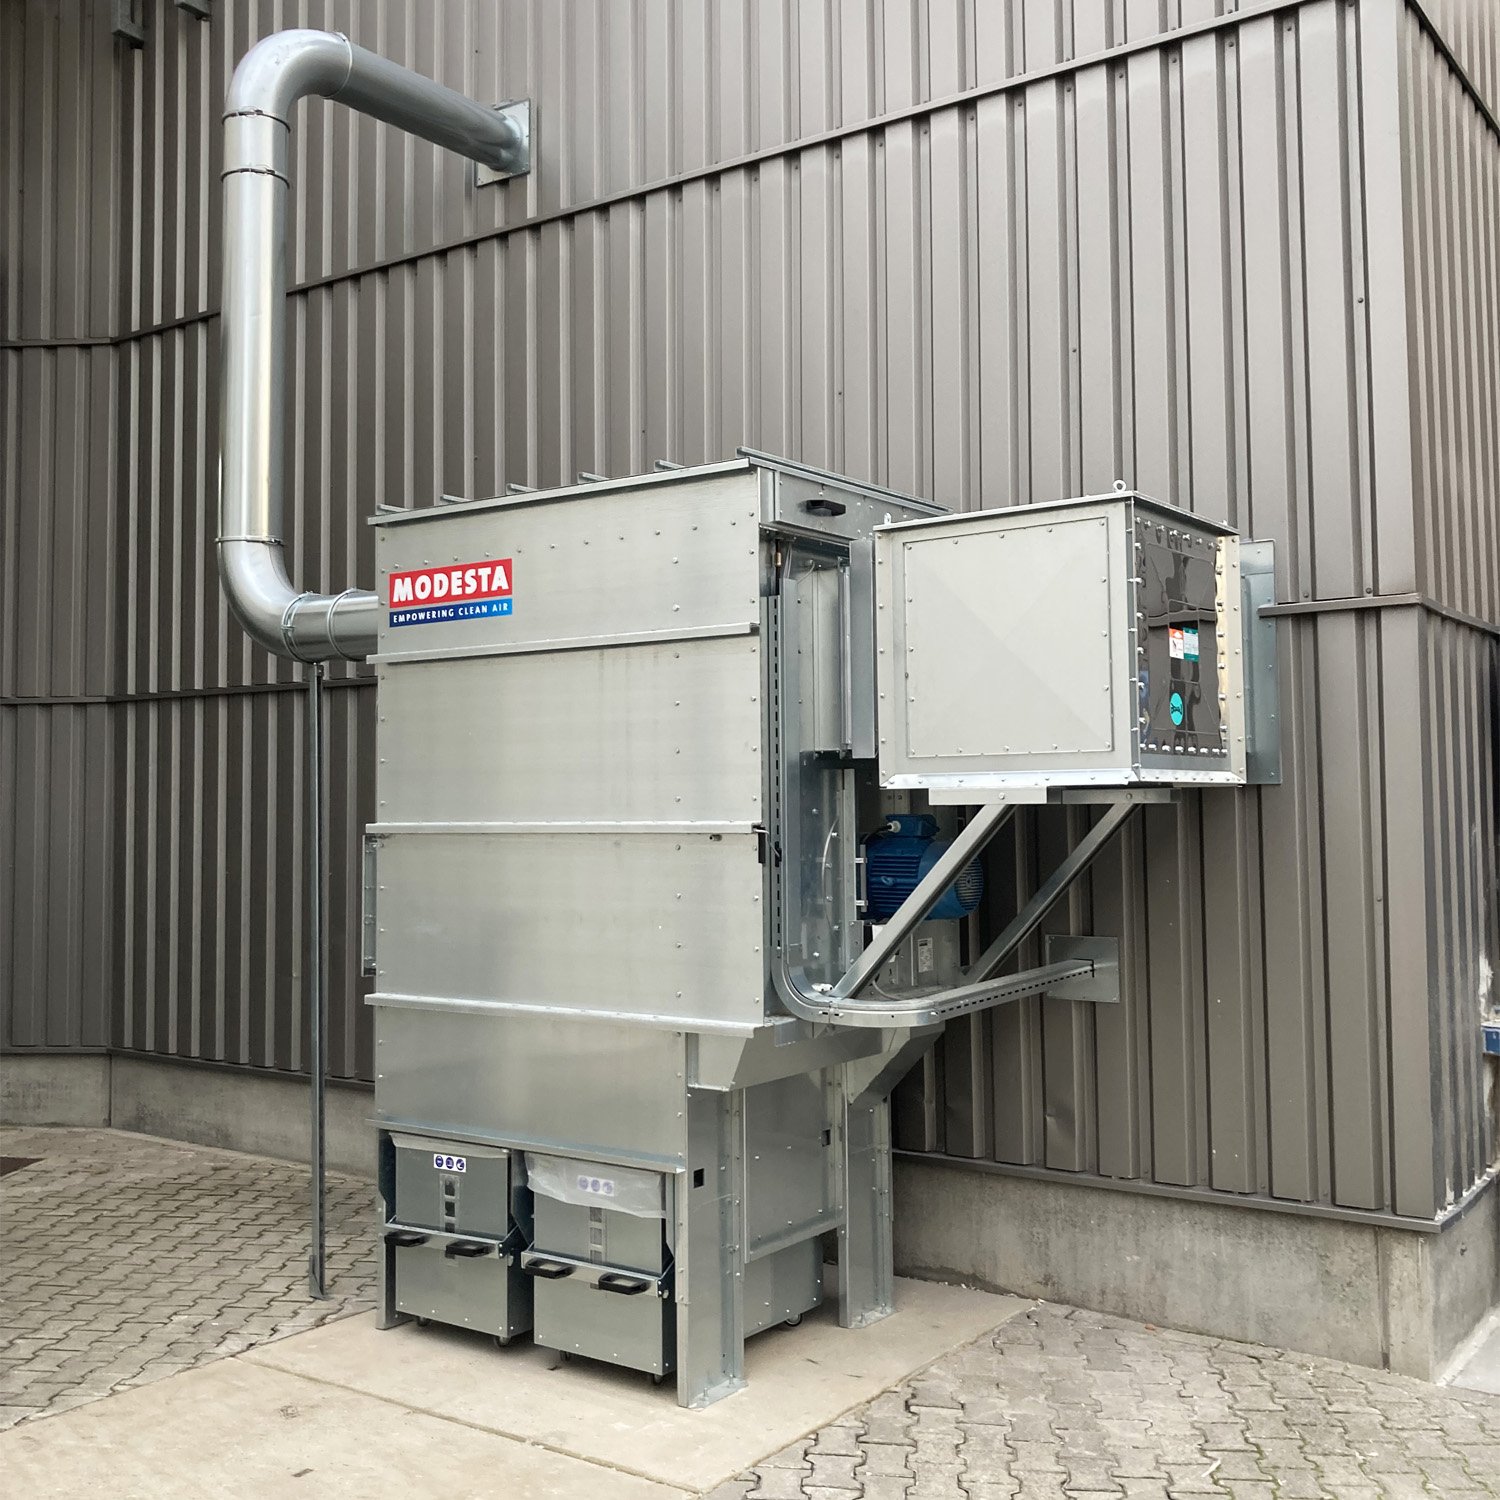 Modesta_Filters_Empowering_Clean_Air_Industrial_Filtration_Dust_Extraction_Collector_System_Deduster_BF_Container_Filter_22.jpg